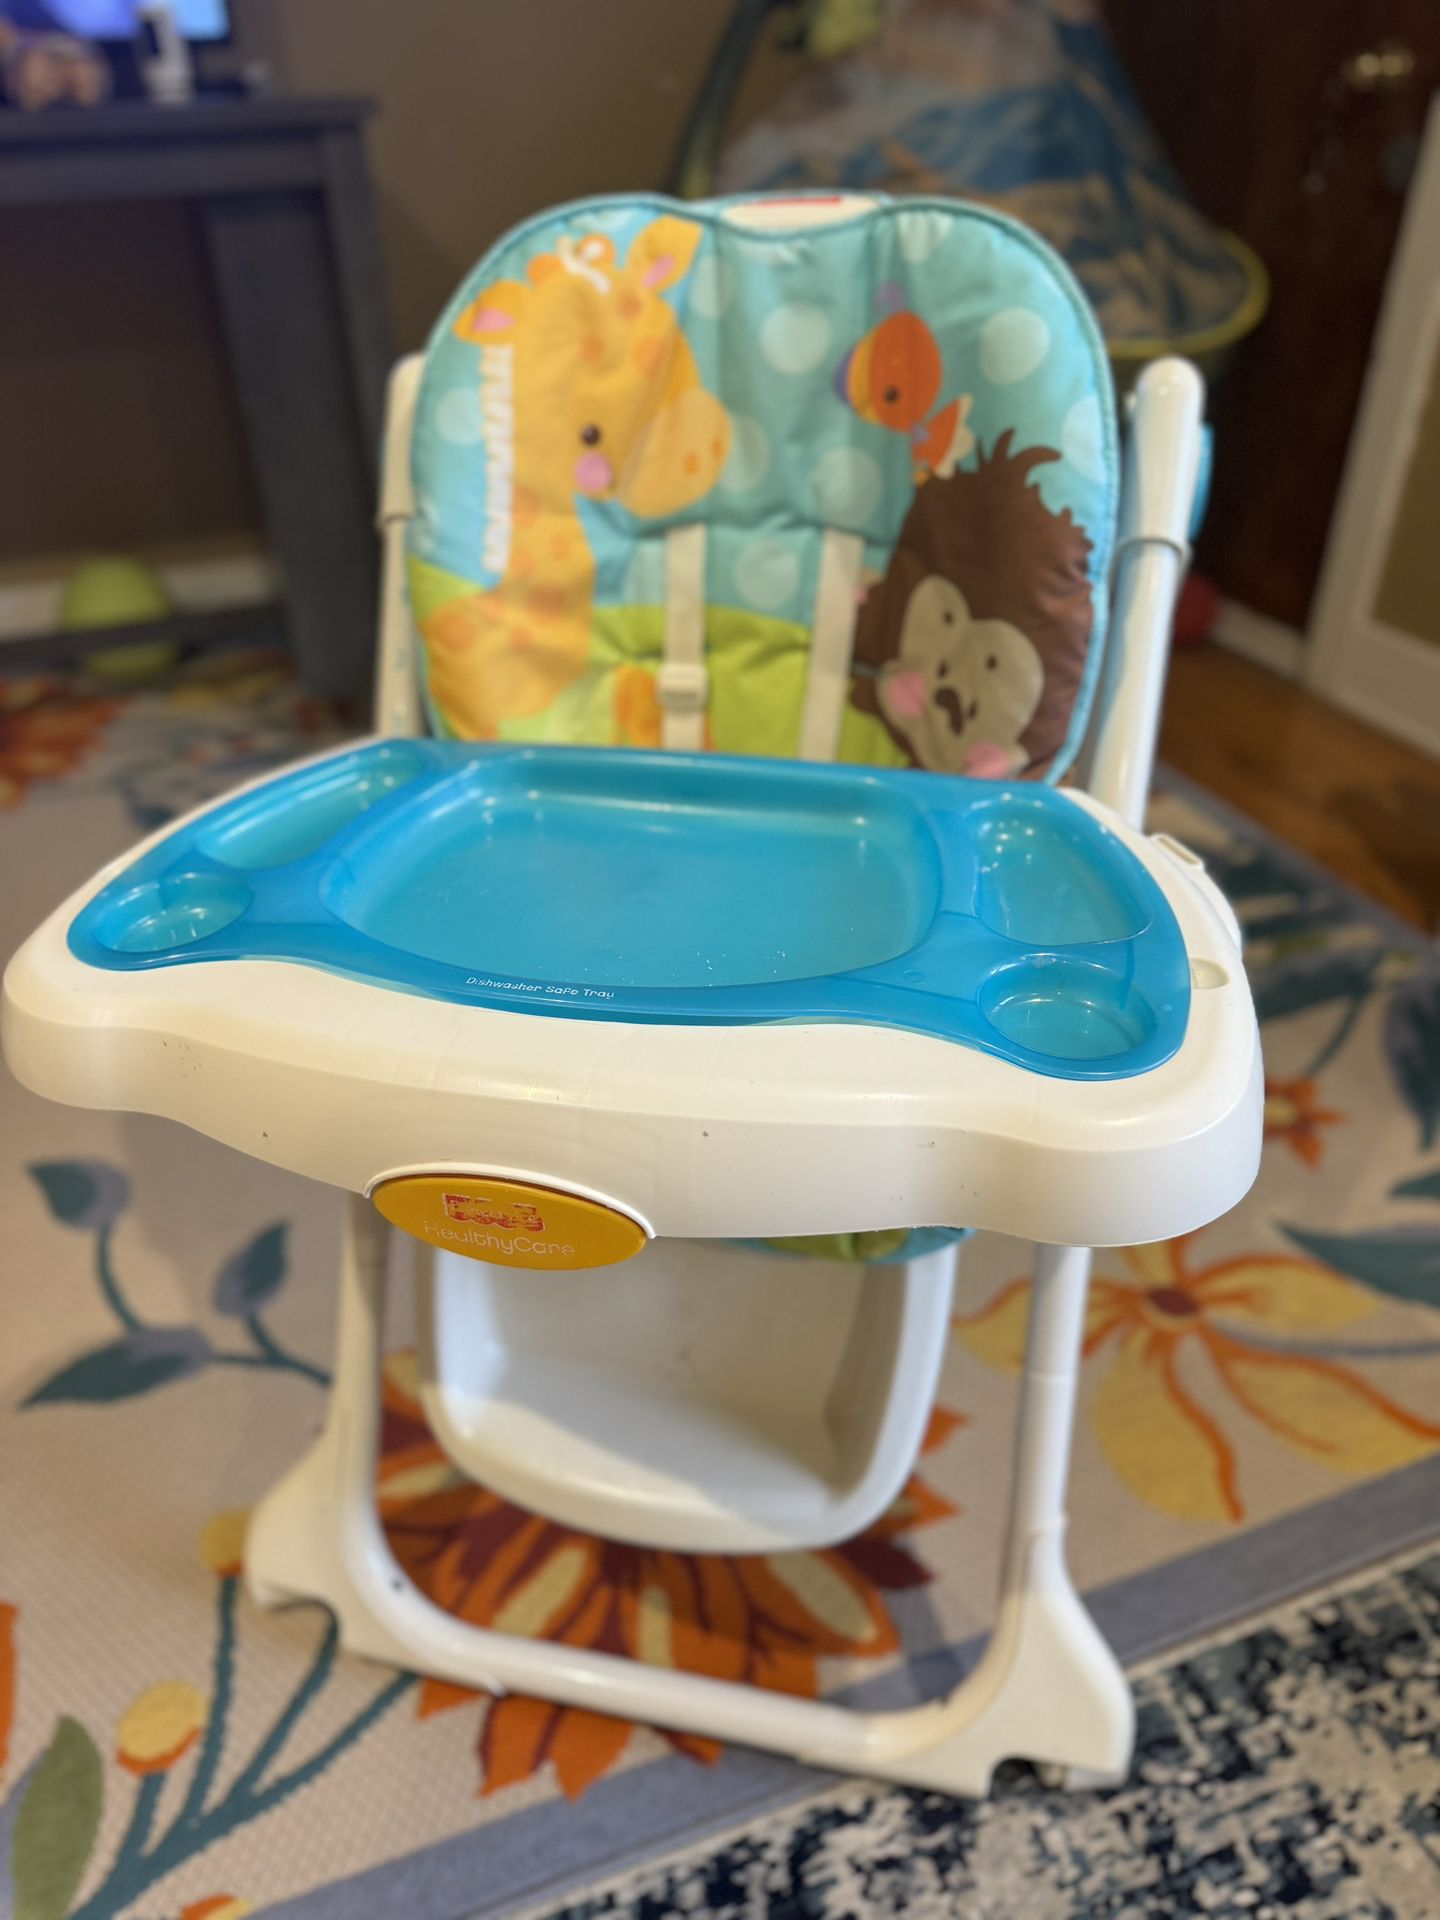 The Fisher-Price Healthy Care High Chair